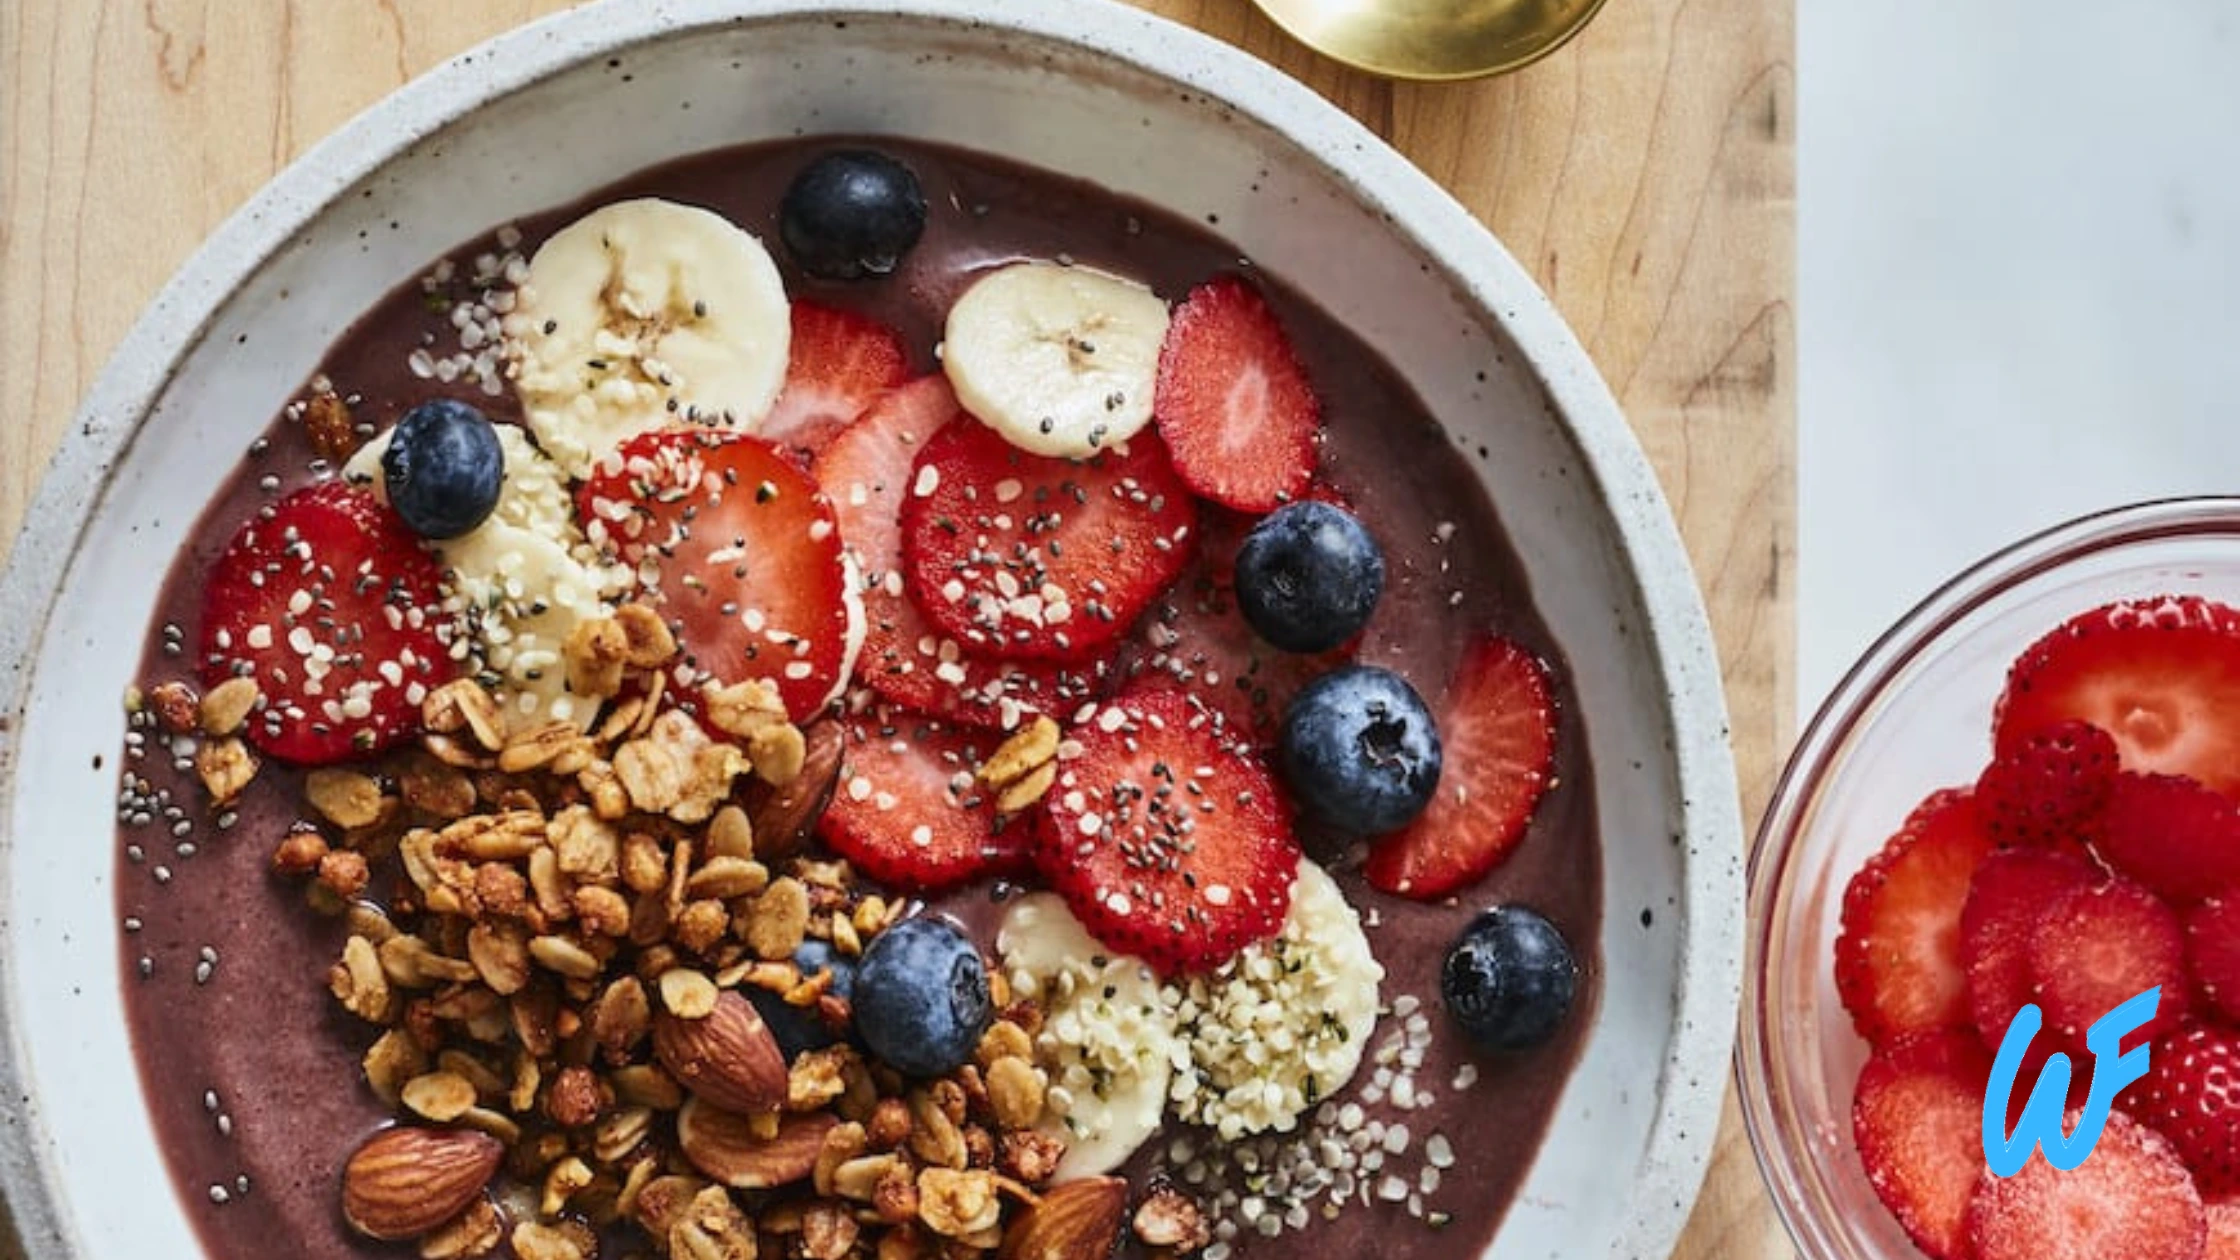 You are currently viewing Acai Bowl with Coconut Flakes and Mixed Berries